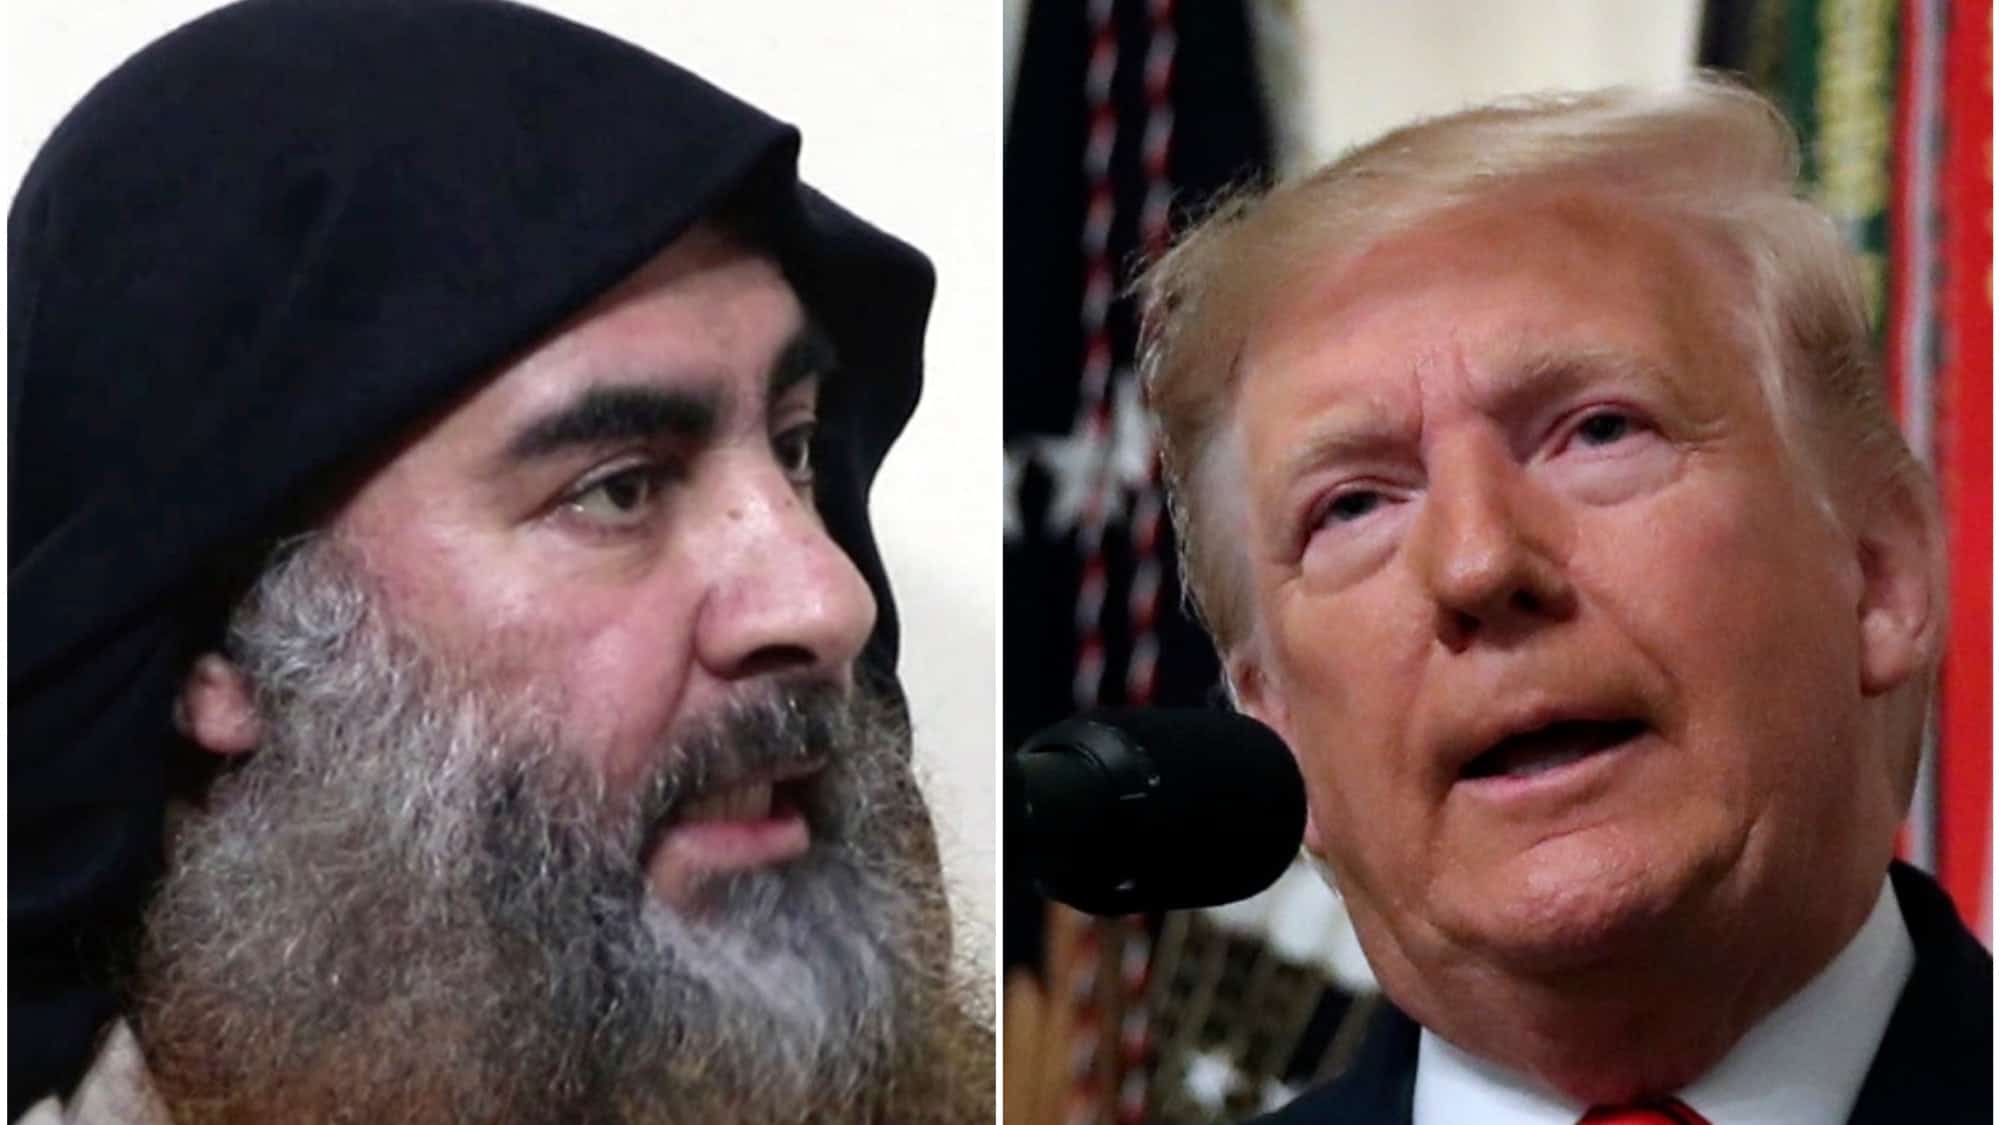 Trump says watching the death of IS leader was “just like watching a movie”